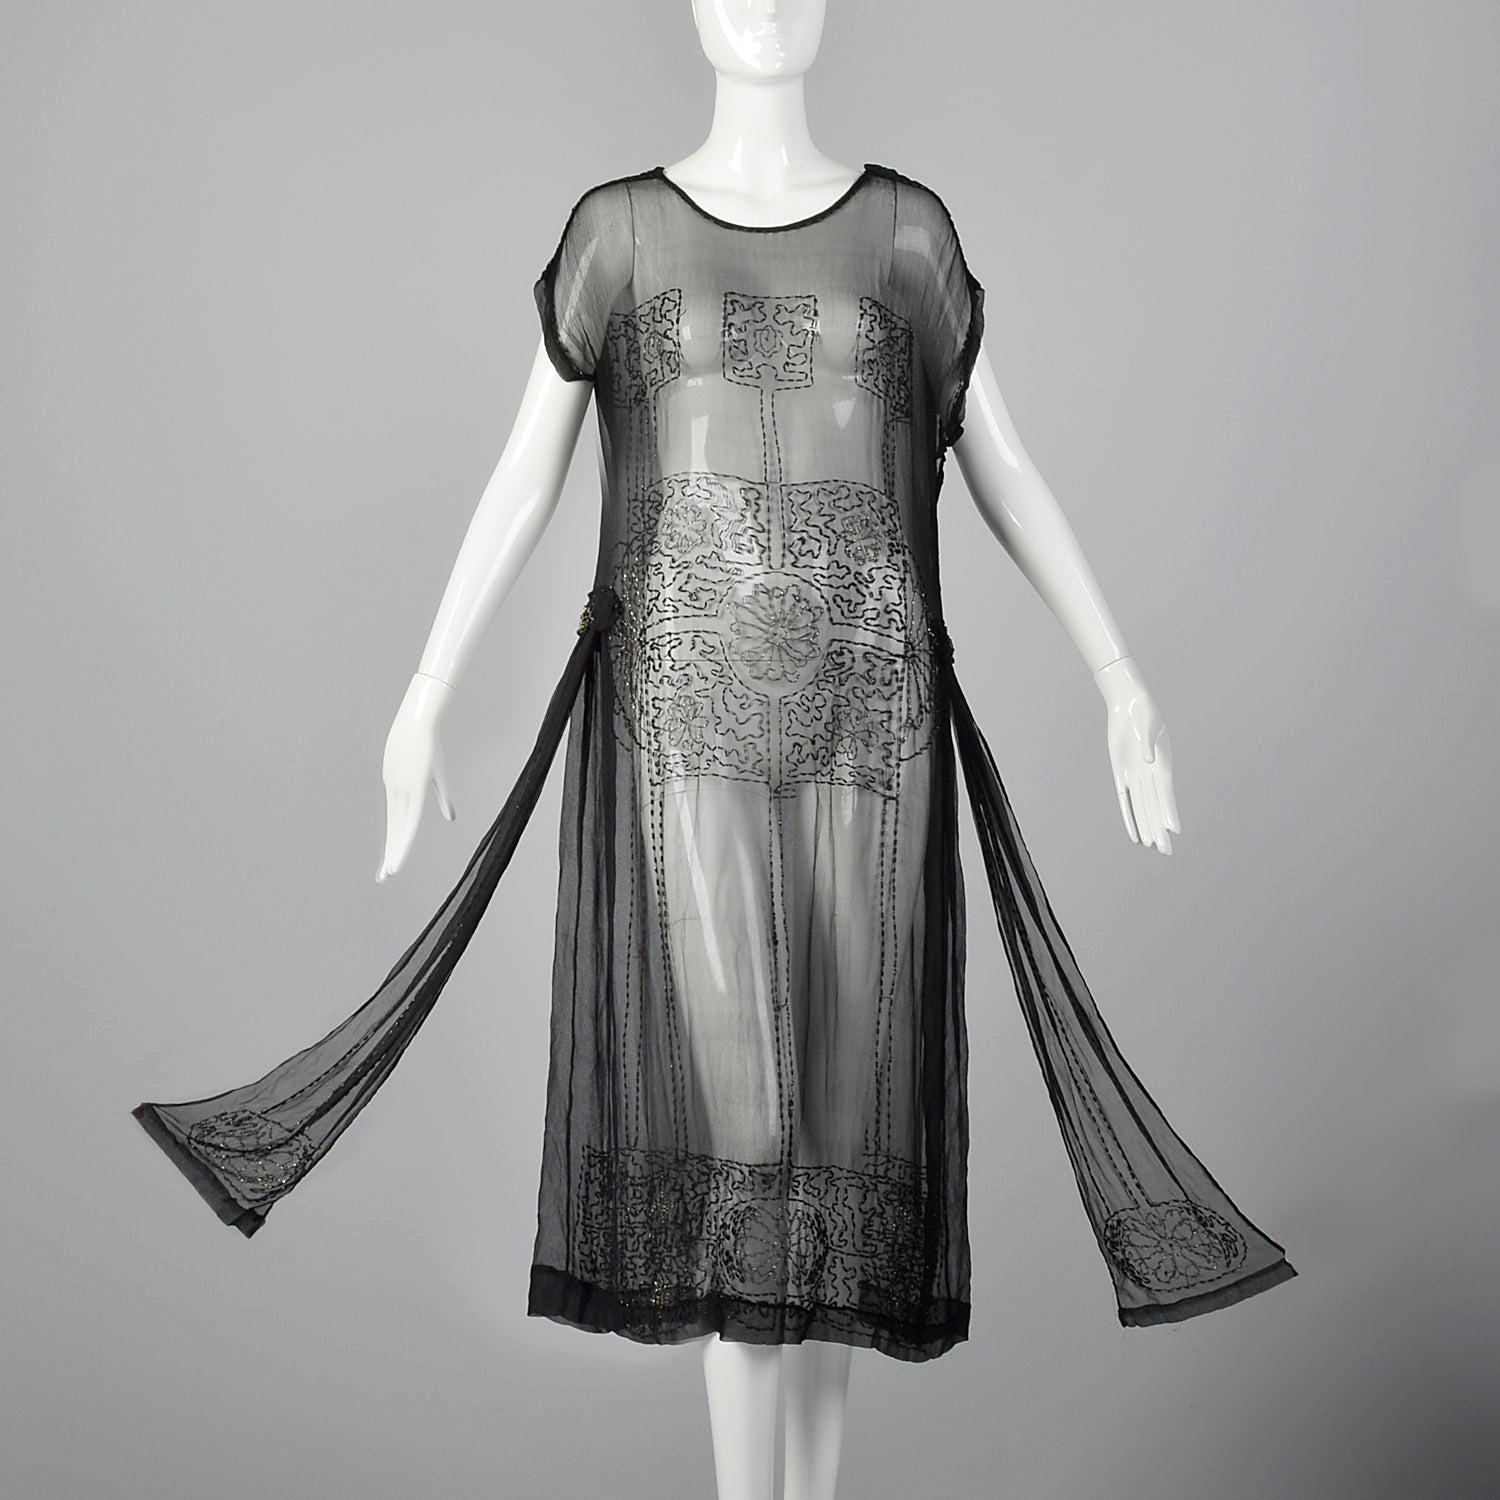 1920s Beaded Sheer Black Dress with Hip Sashes